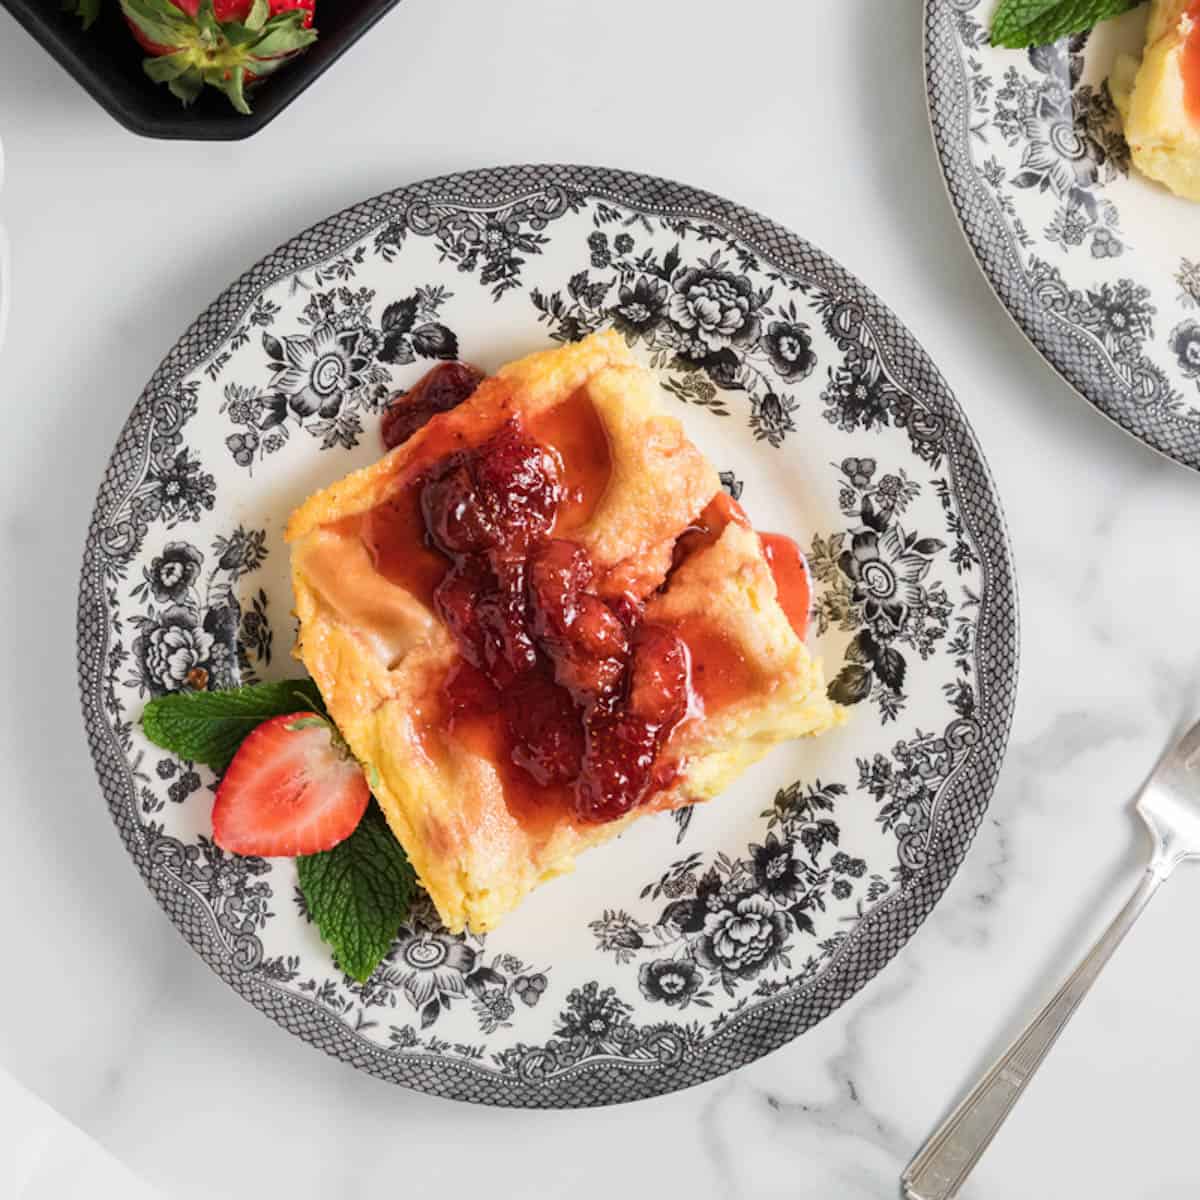 A slice of blintz souffle casserole on a plate with strawberry jam.